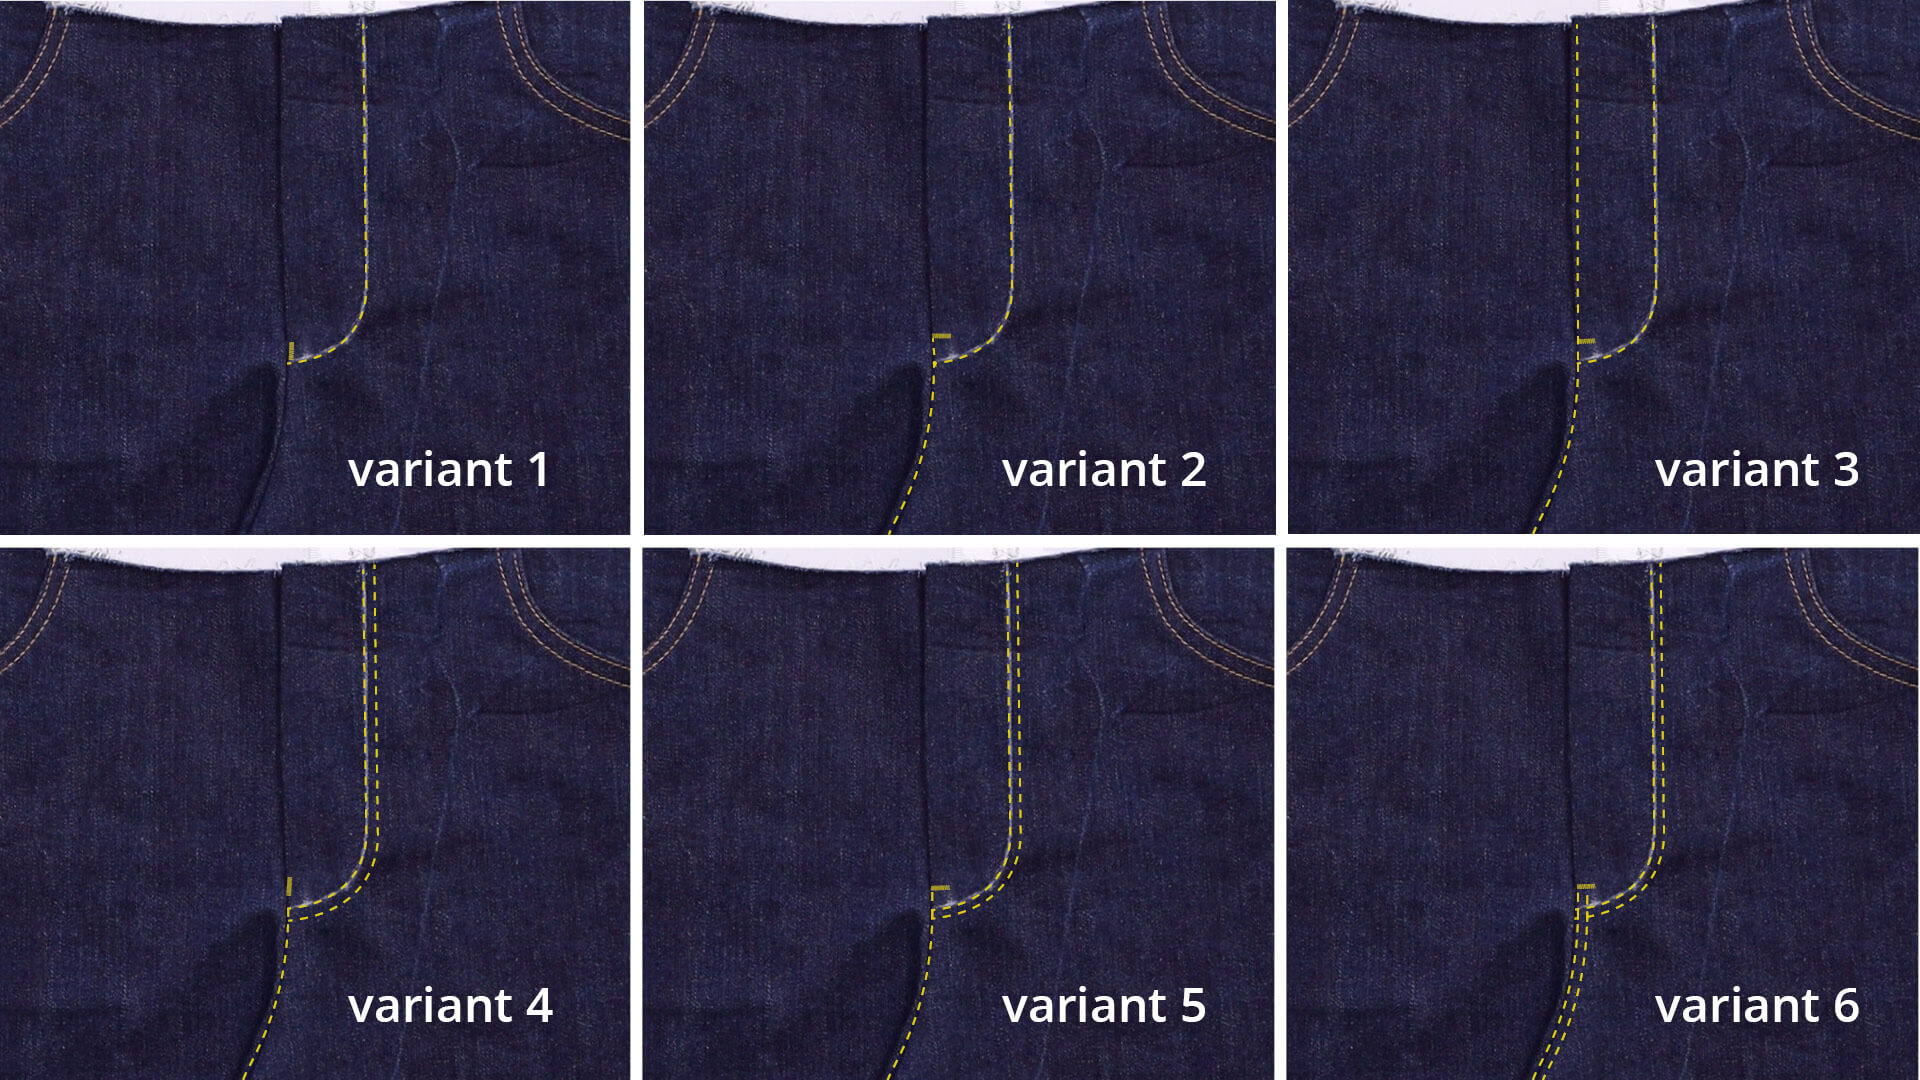 smartPATTERN sewing instructions for slit with zipper of jeans - design variations of the slit quilting